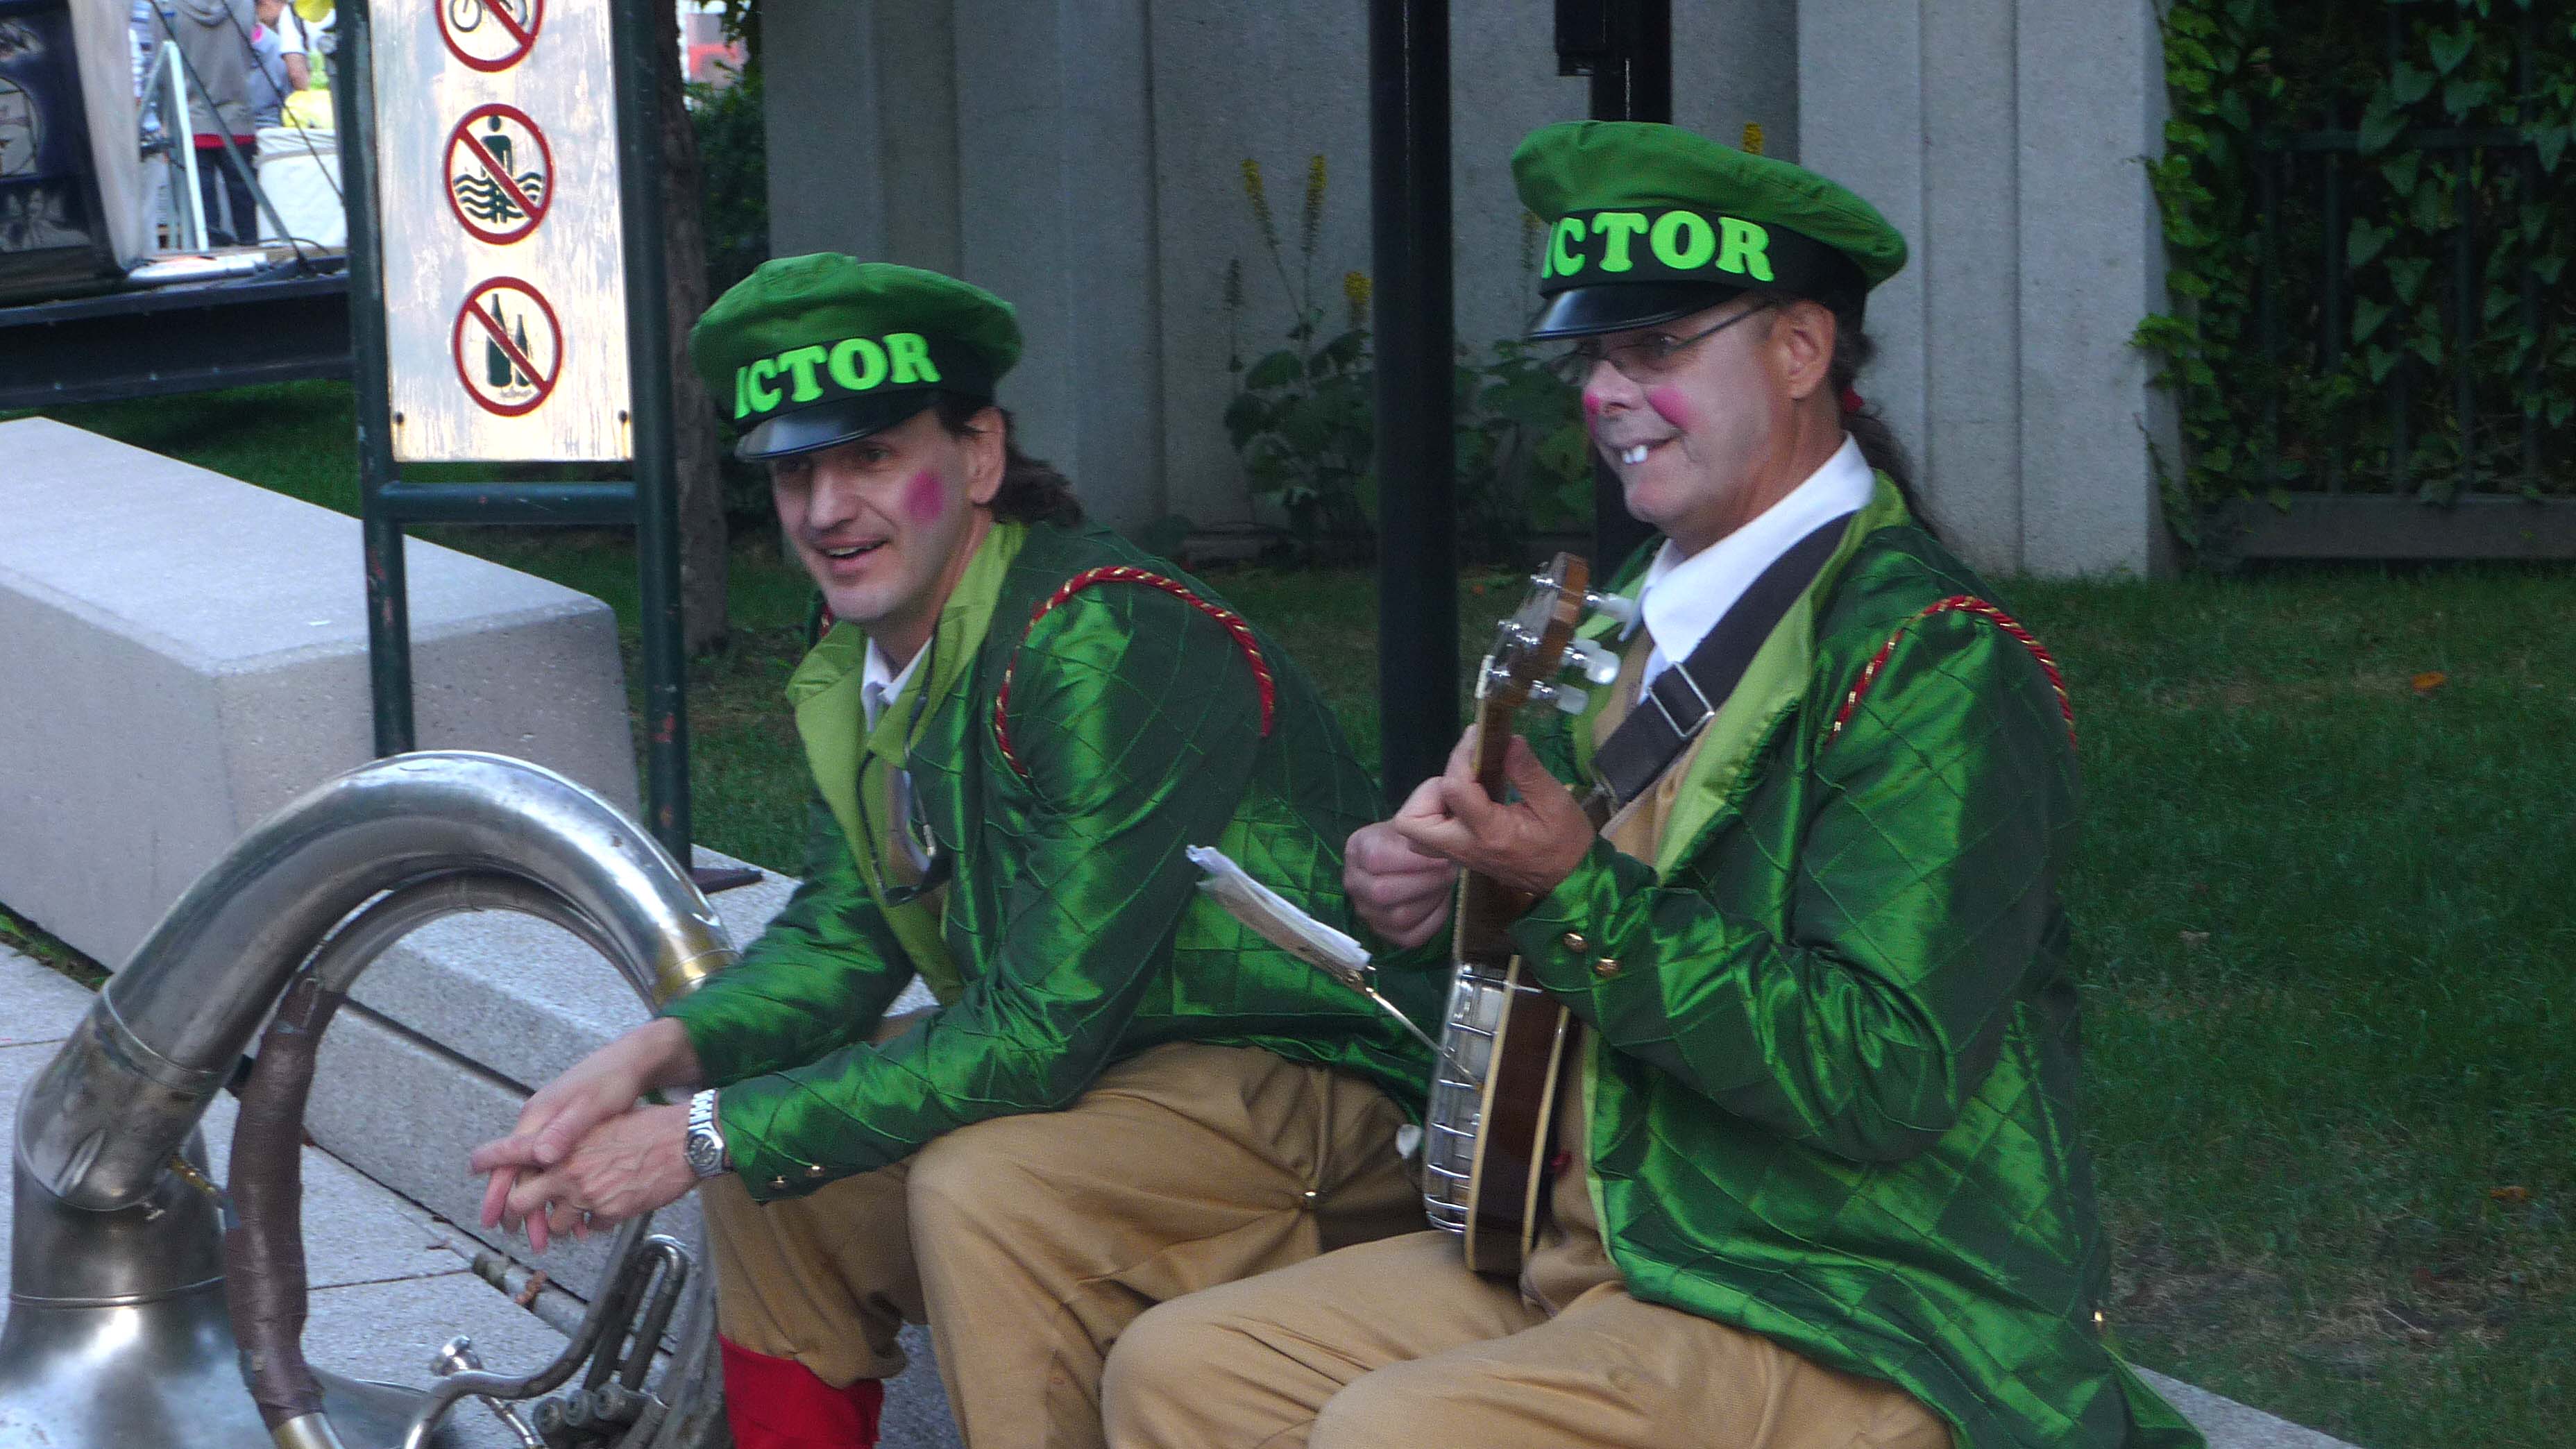 Strange musicians at the Just for Laughs festival. Dont you love the buck teeth?